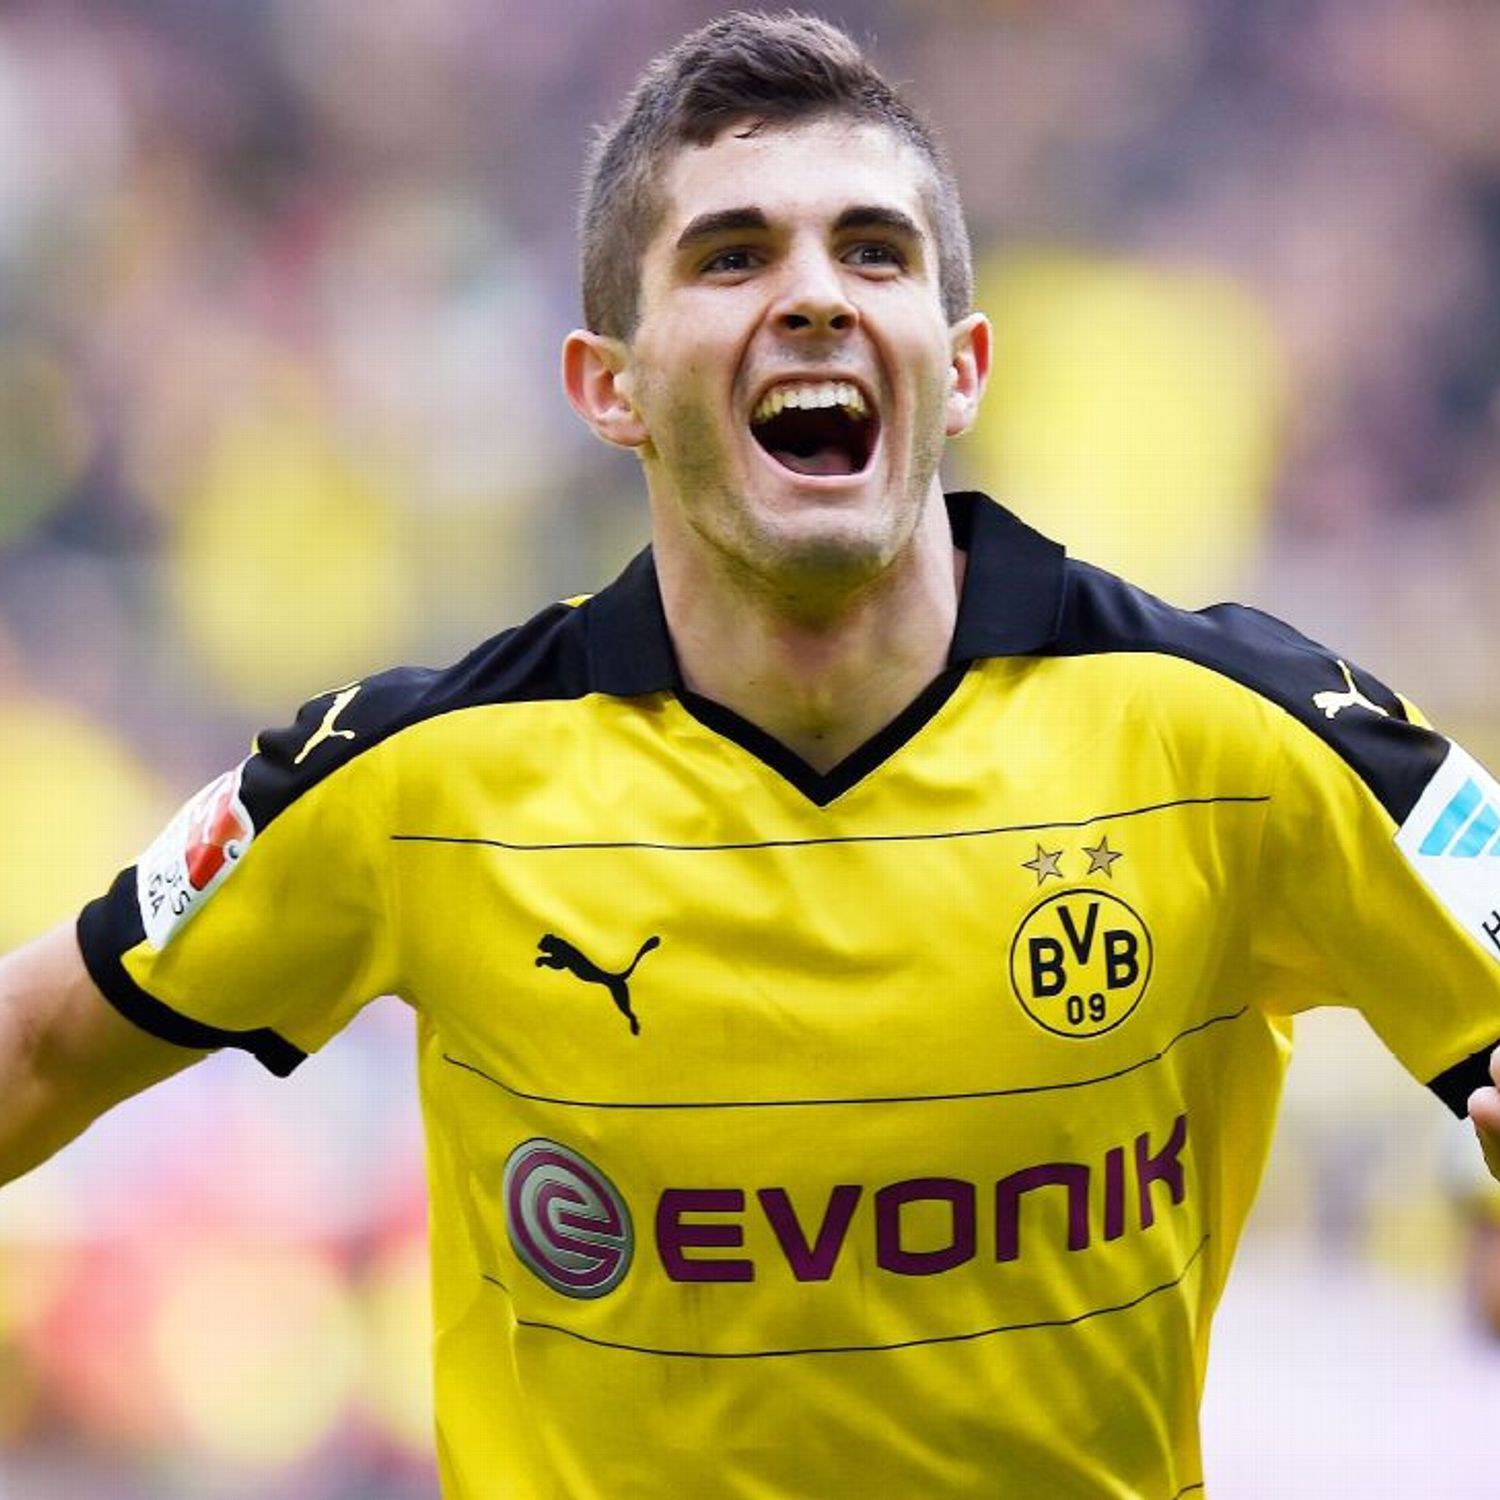 Christian Pulisic youngest non-German to score in Bundesliga - ESPN FC